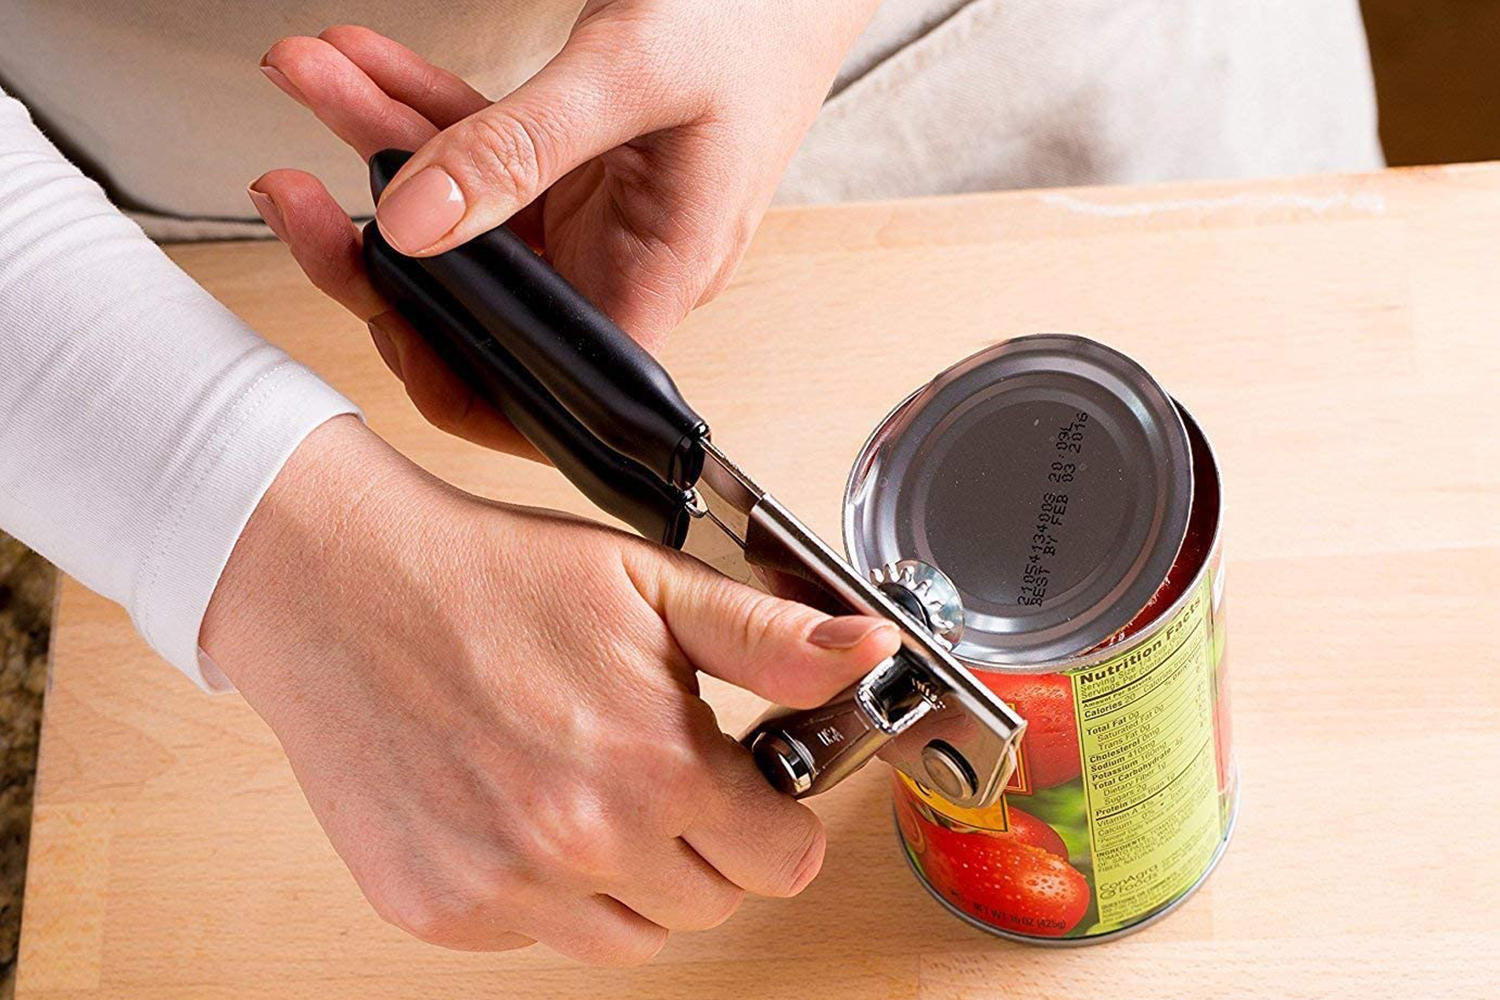 Choice Prep Standard Duty #10 Manual Can Opener with Stainless Steel Base